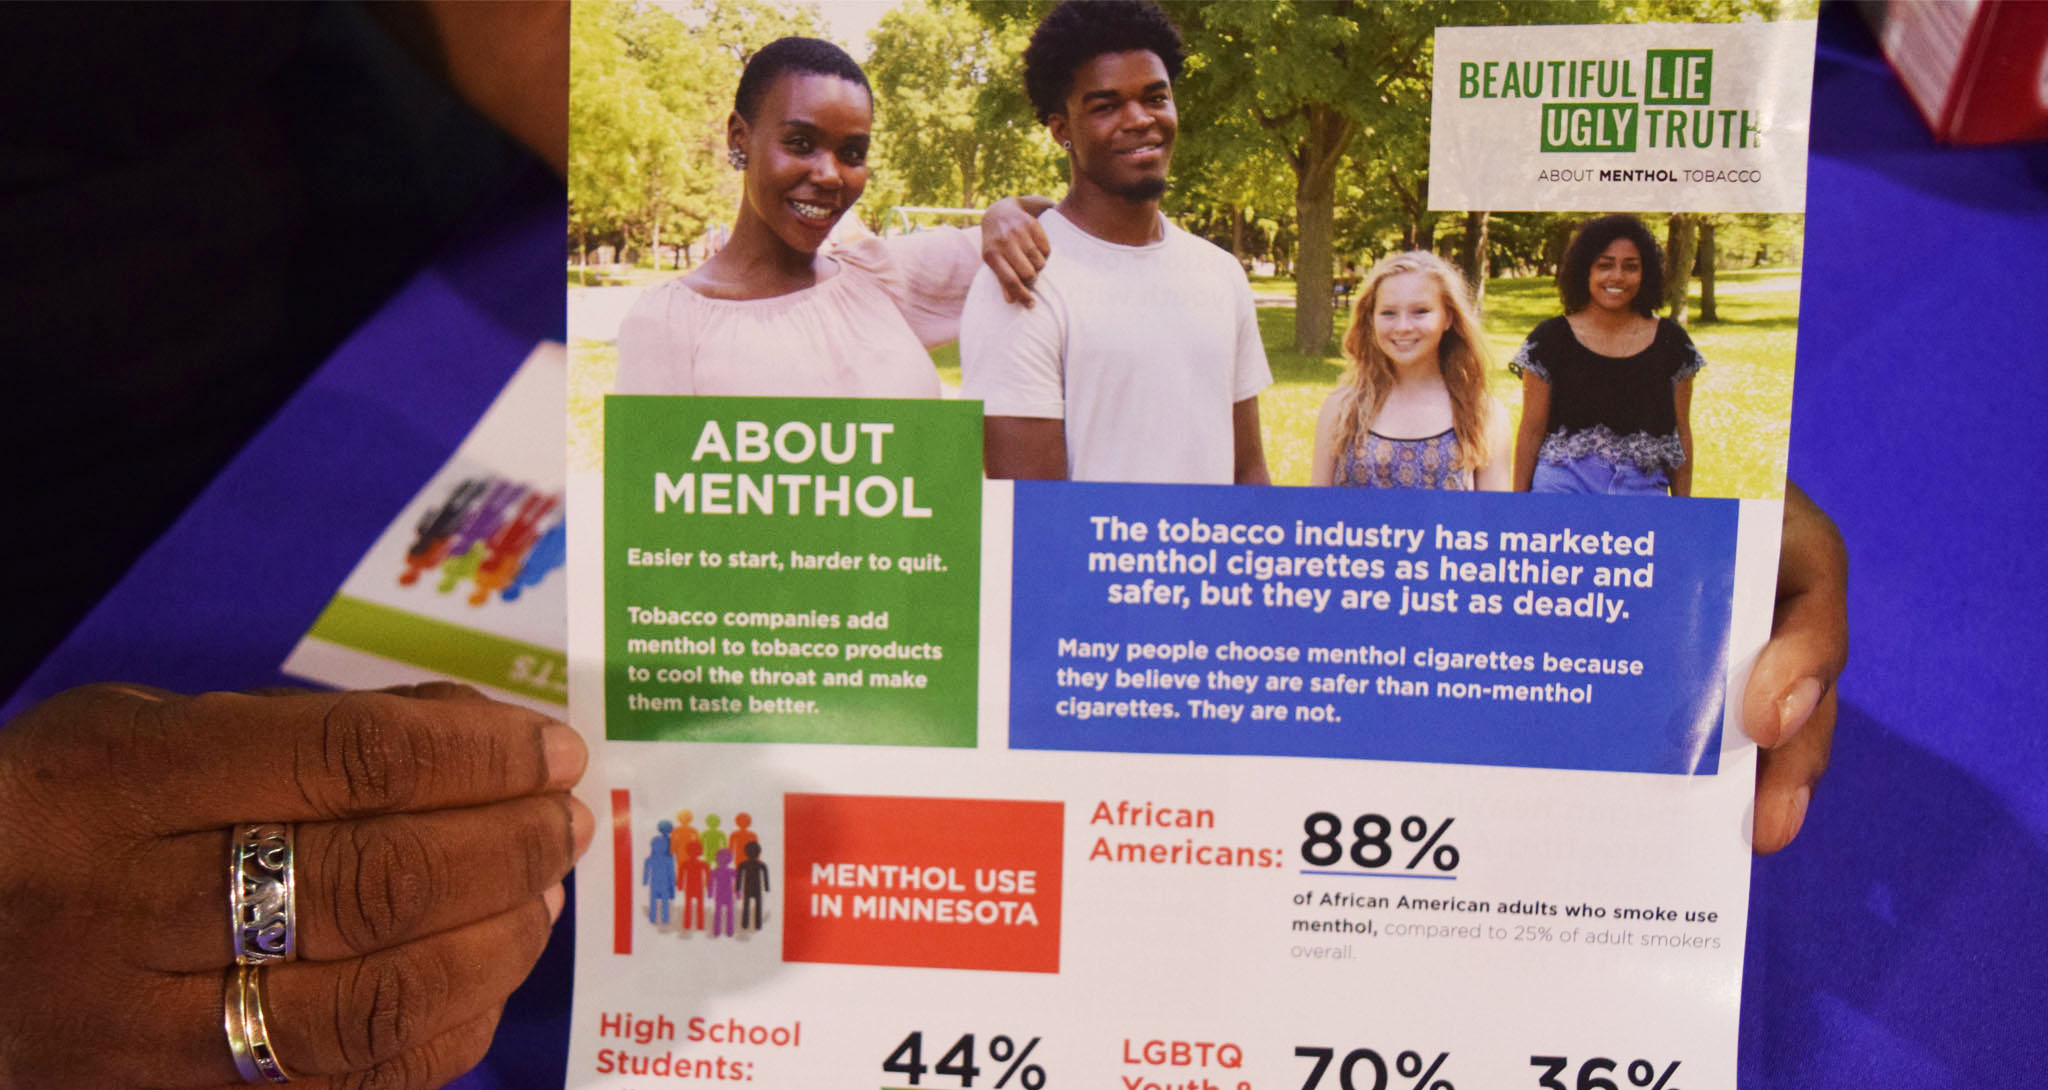 Menthol tobacco products are just as dangerous as their non-menthol counterparts